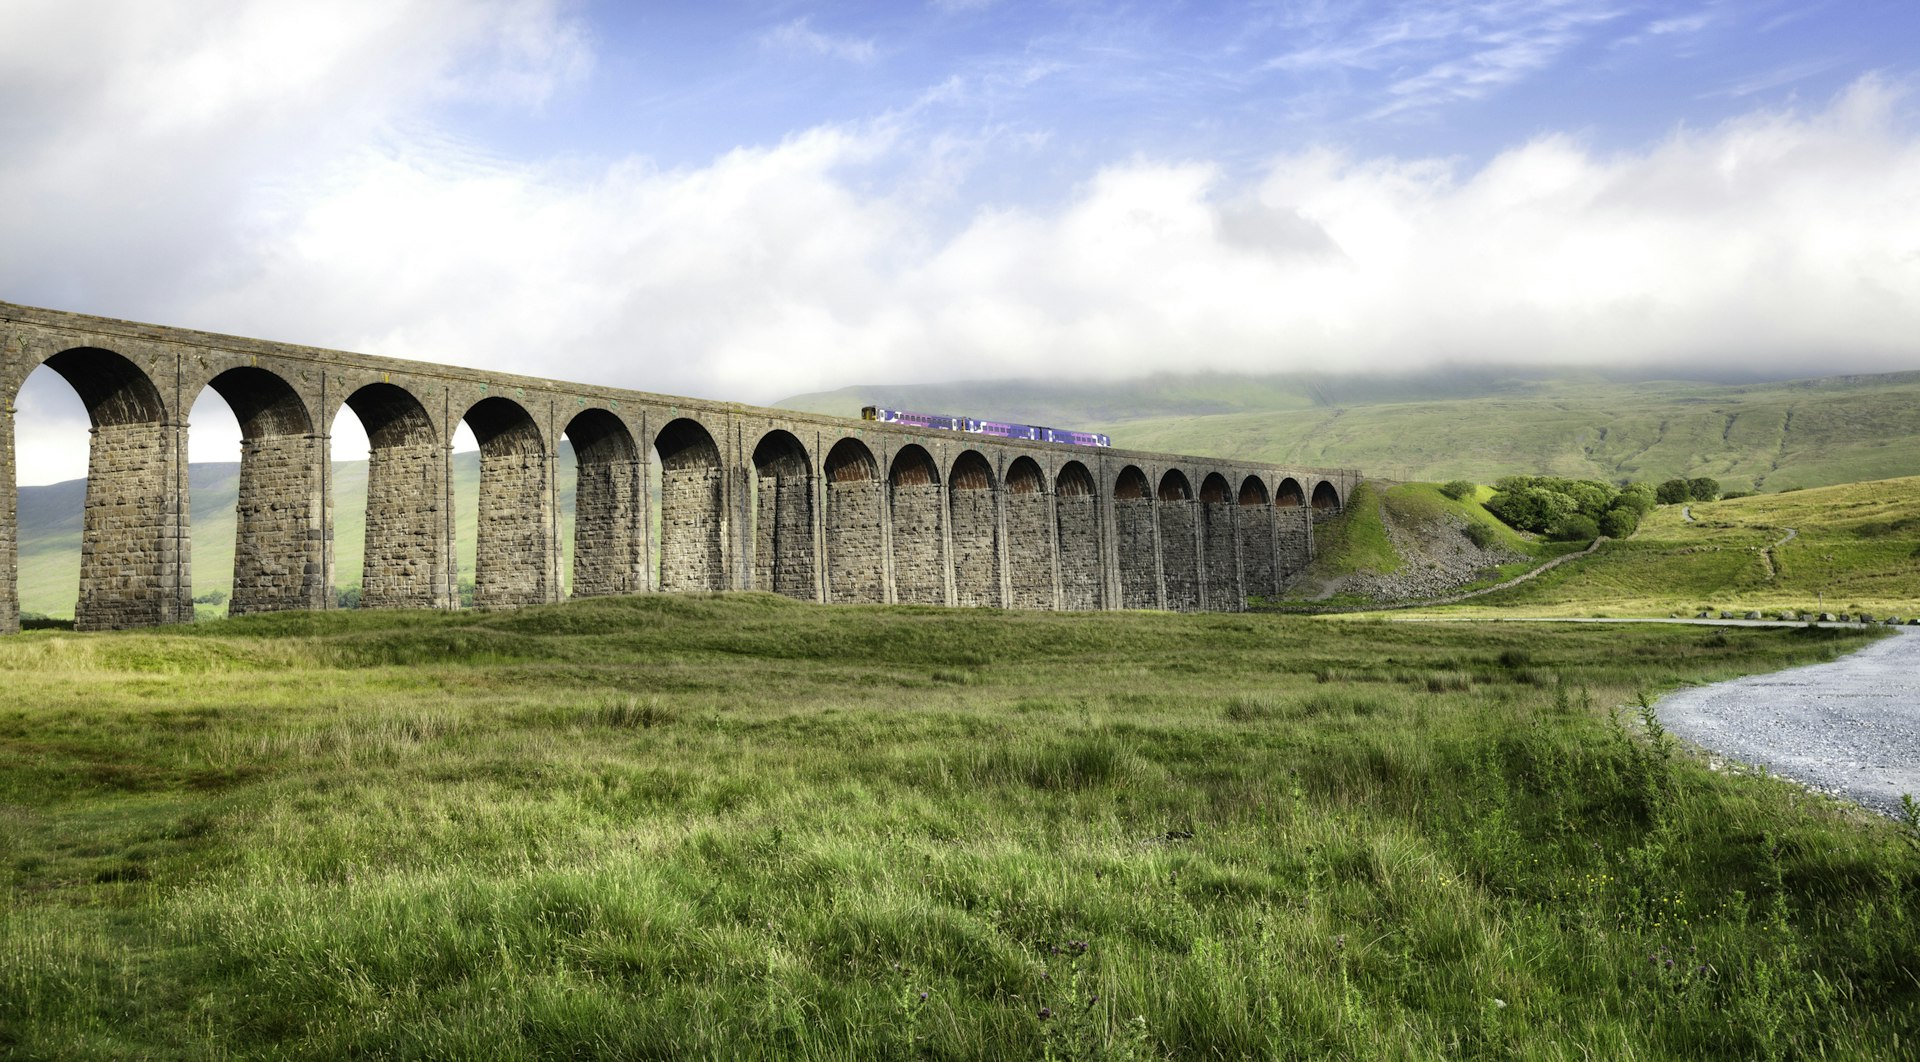 Train crossing the Ribblehead viaduct in Yorkshire Dales, England.